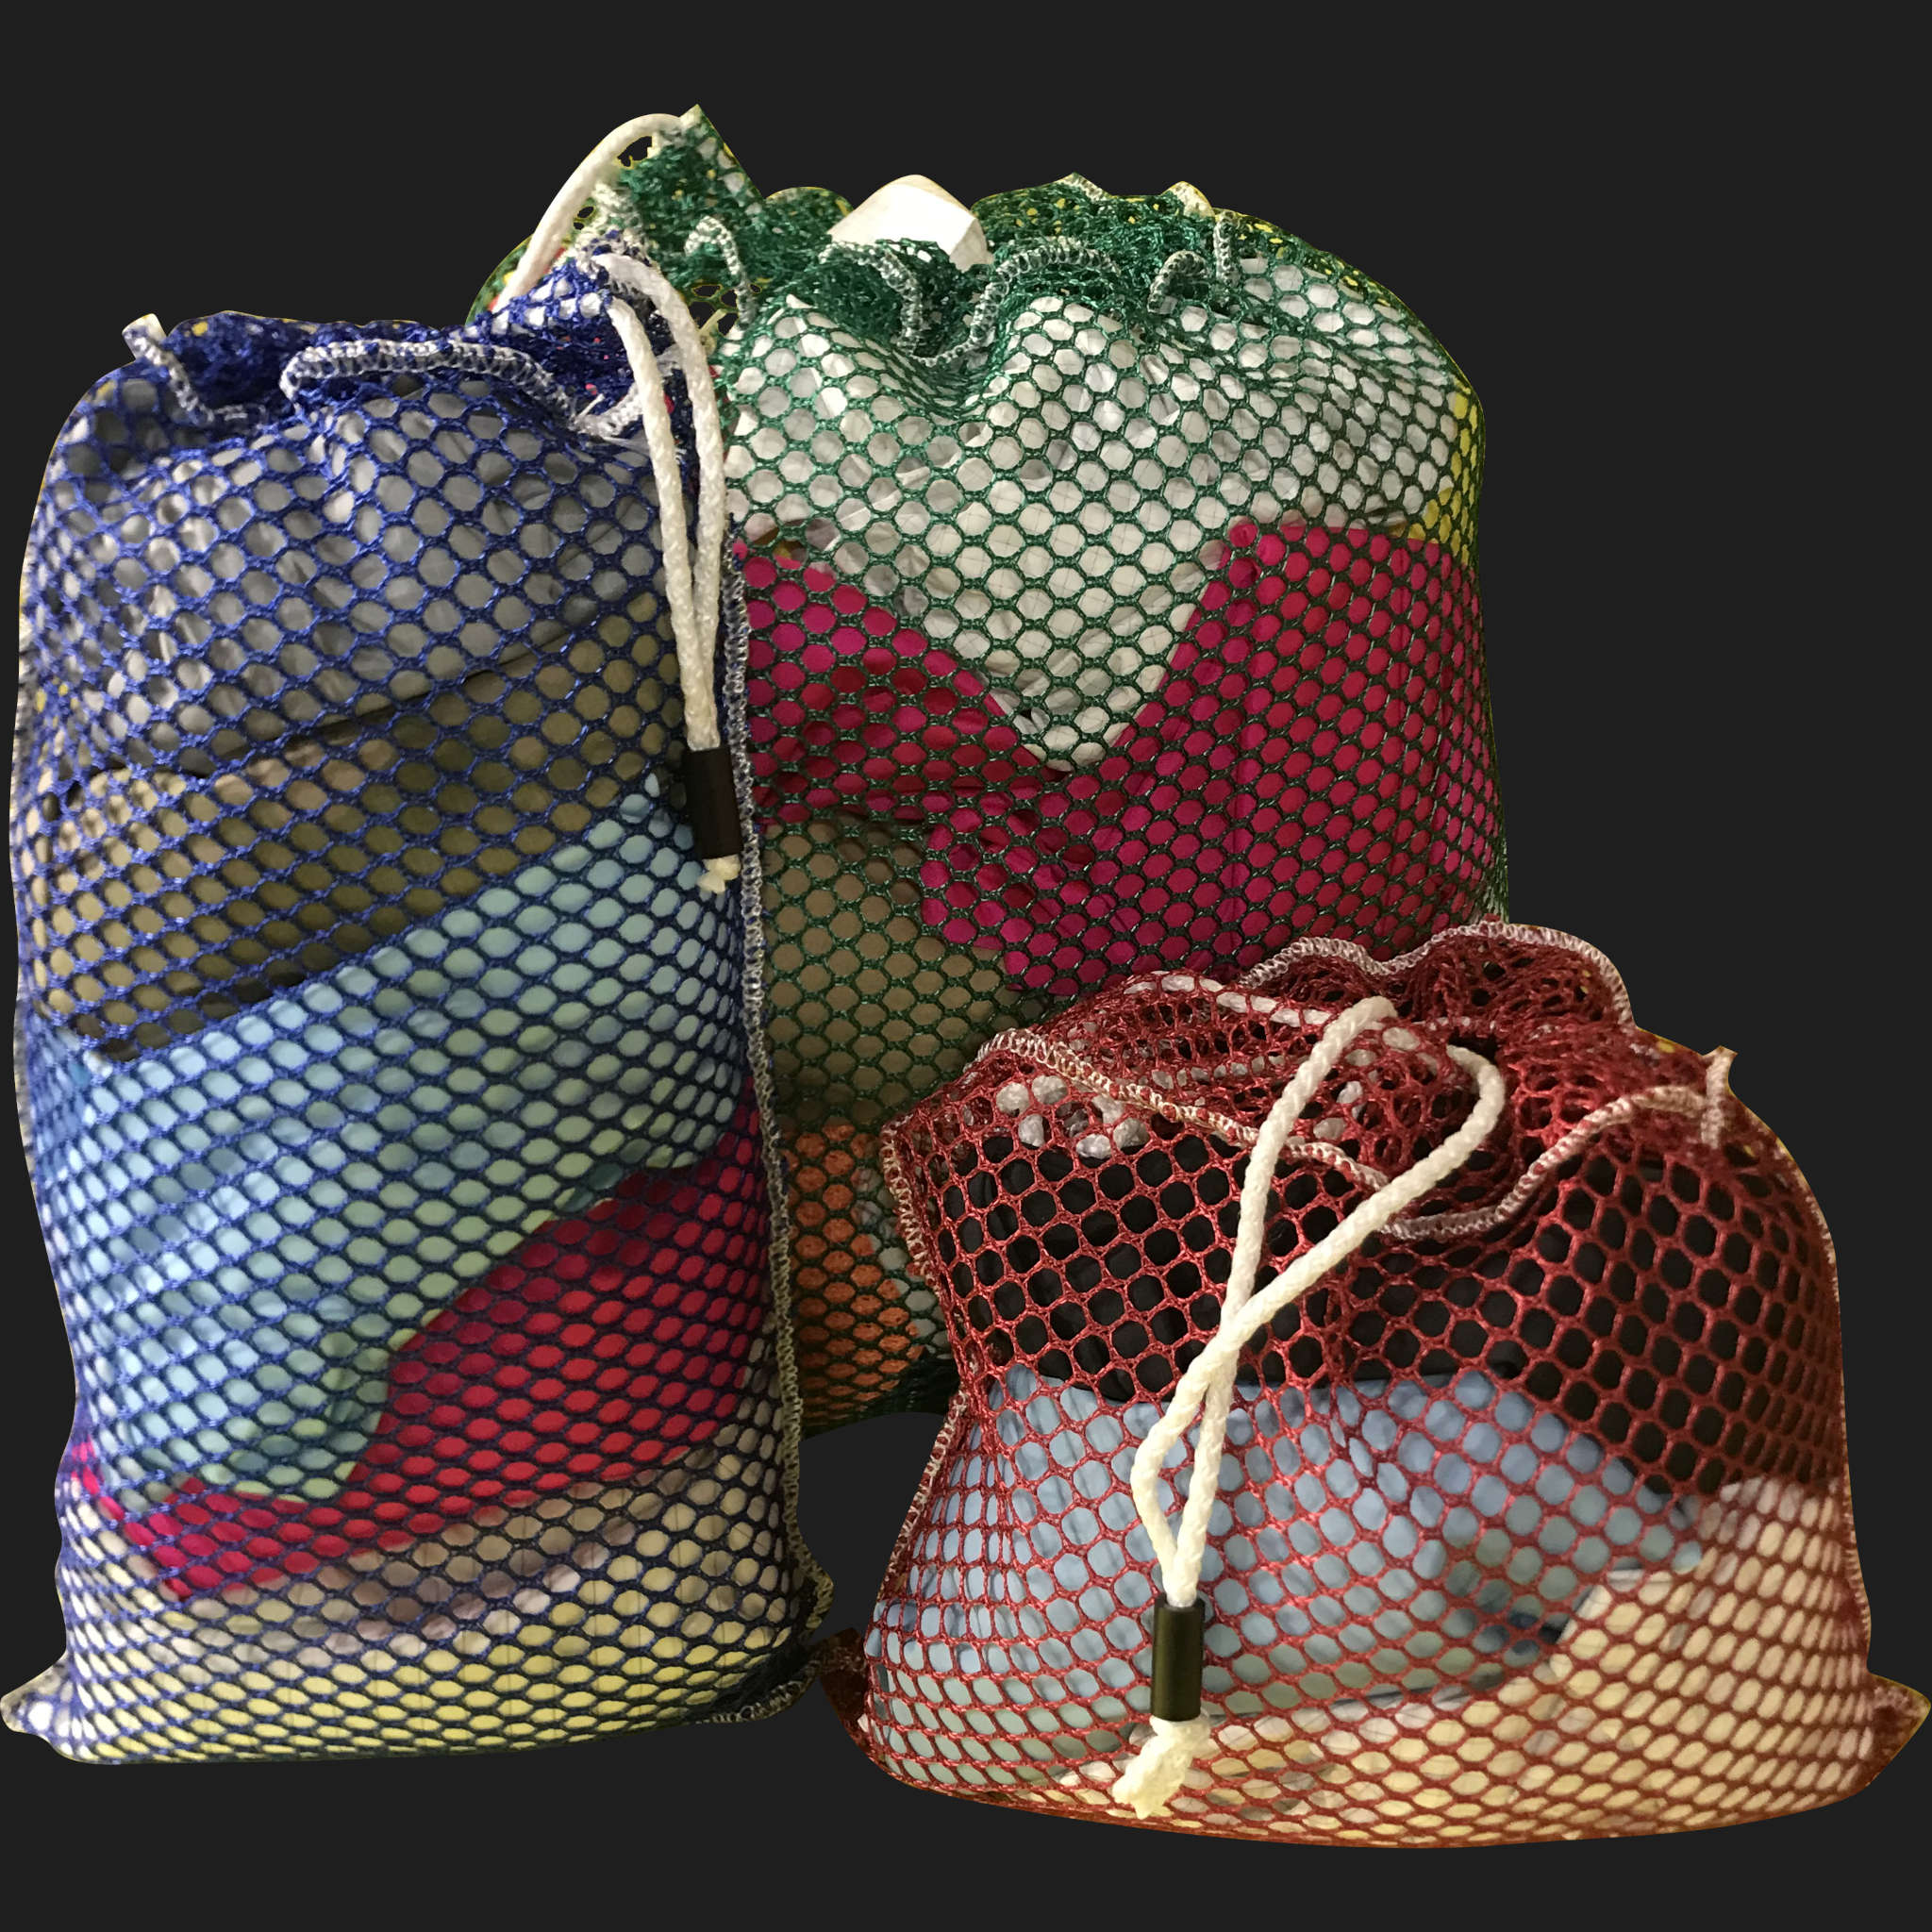 46" x 60" Customized Mesh-Net-Laundry Bags Heavy Duty with Cord and barrellock closure